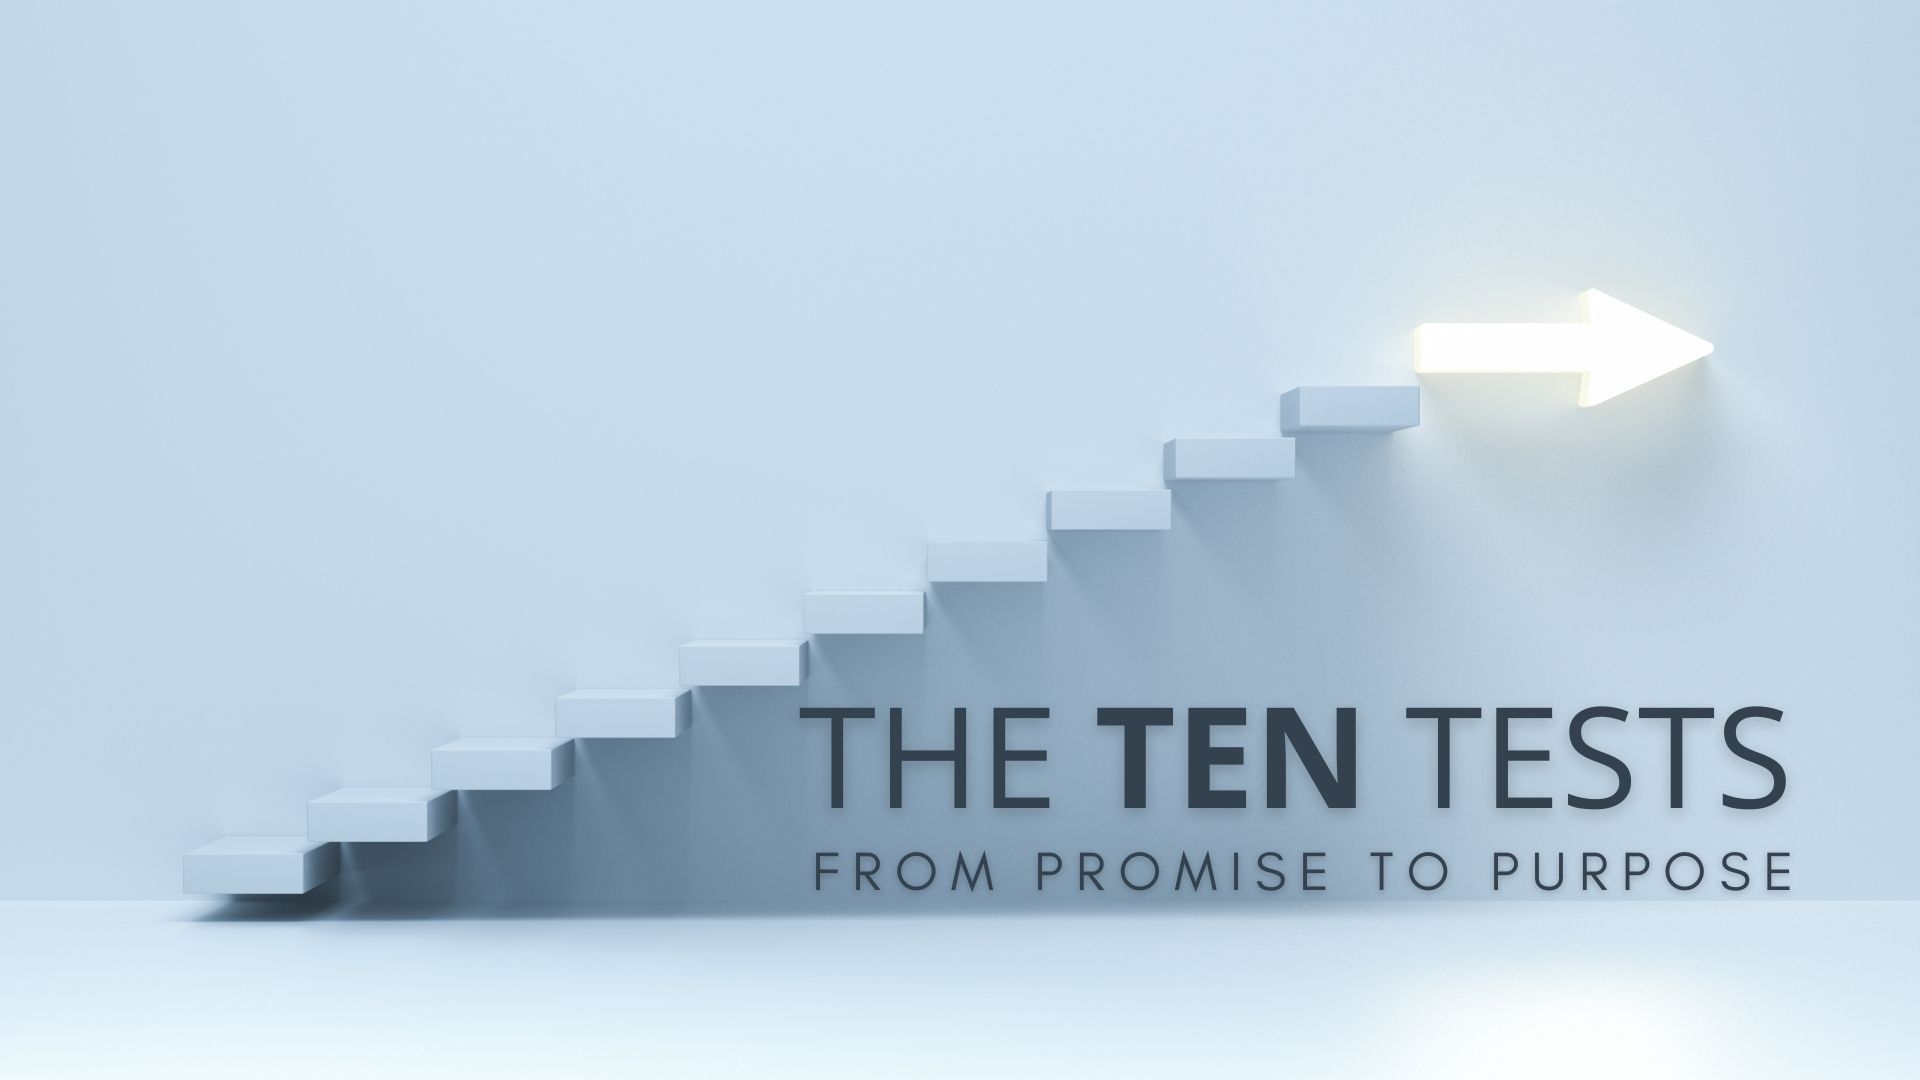 The TEN Tests: From Promise to Purpose - The Perseverance Test